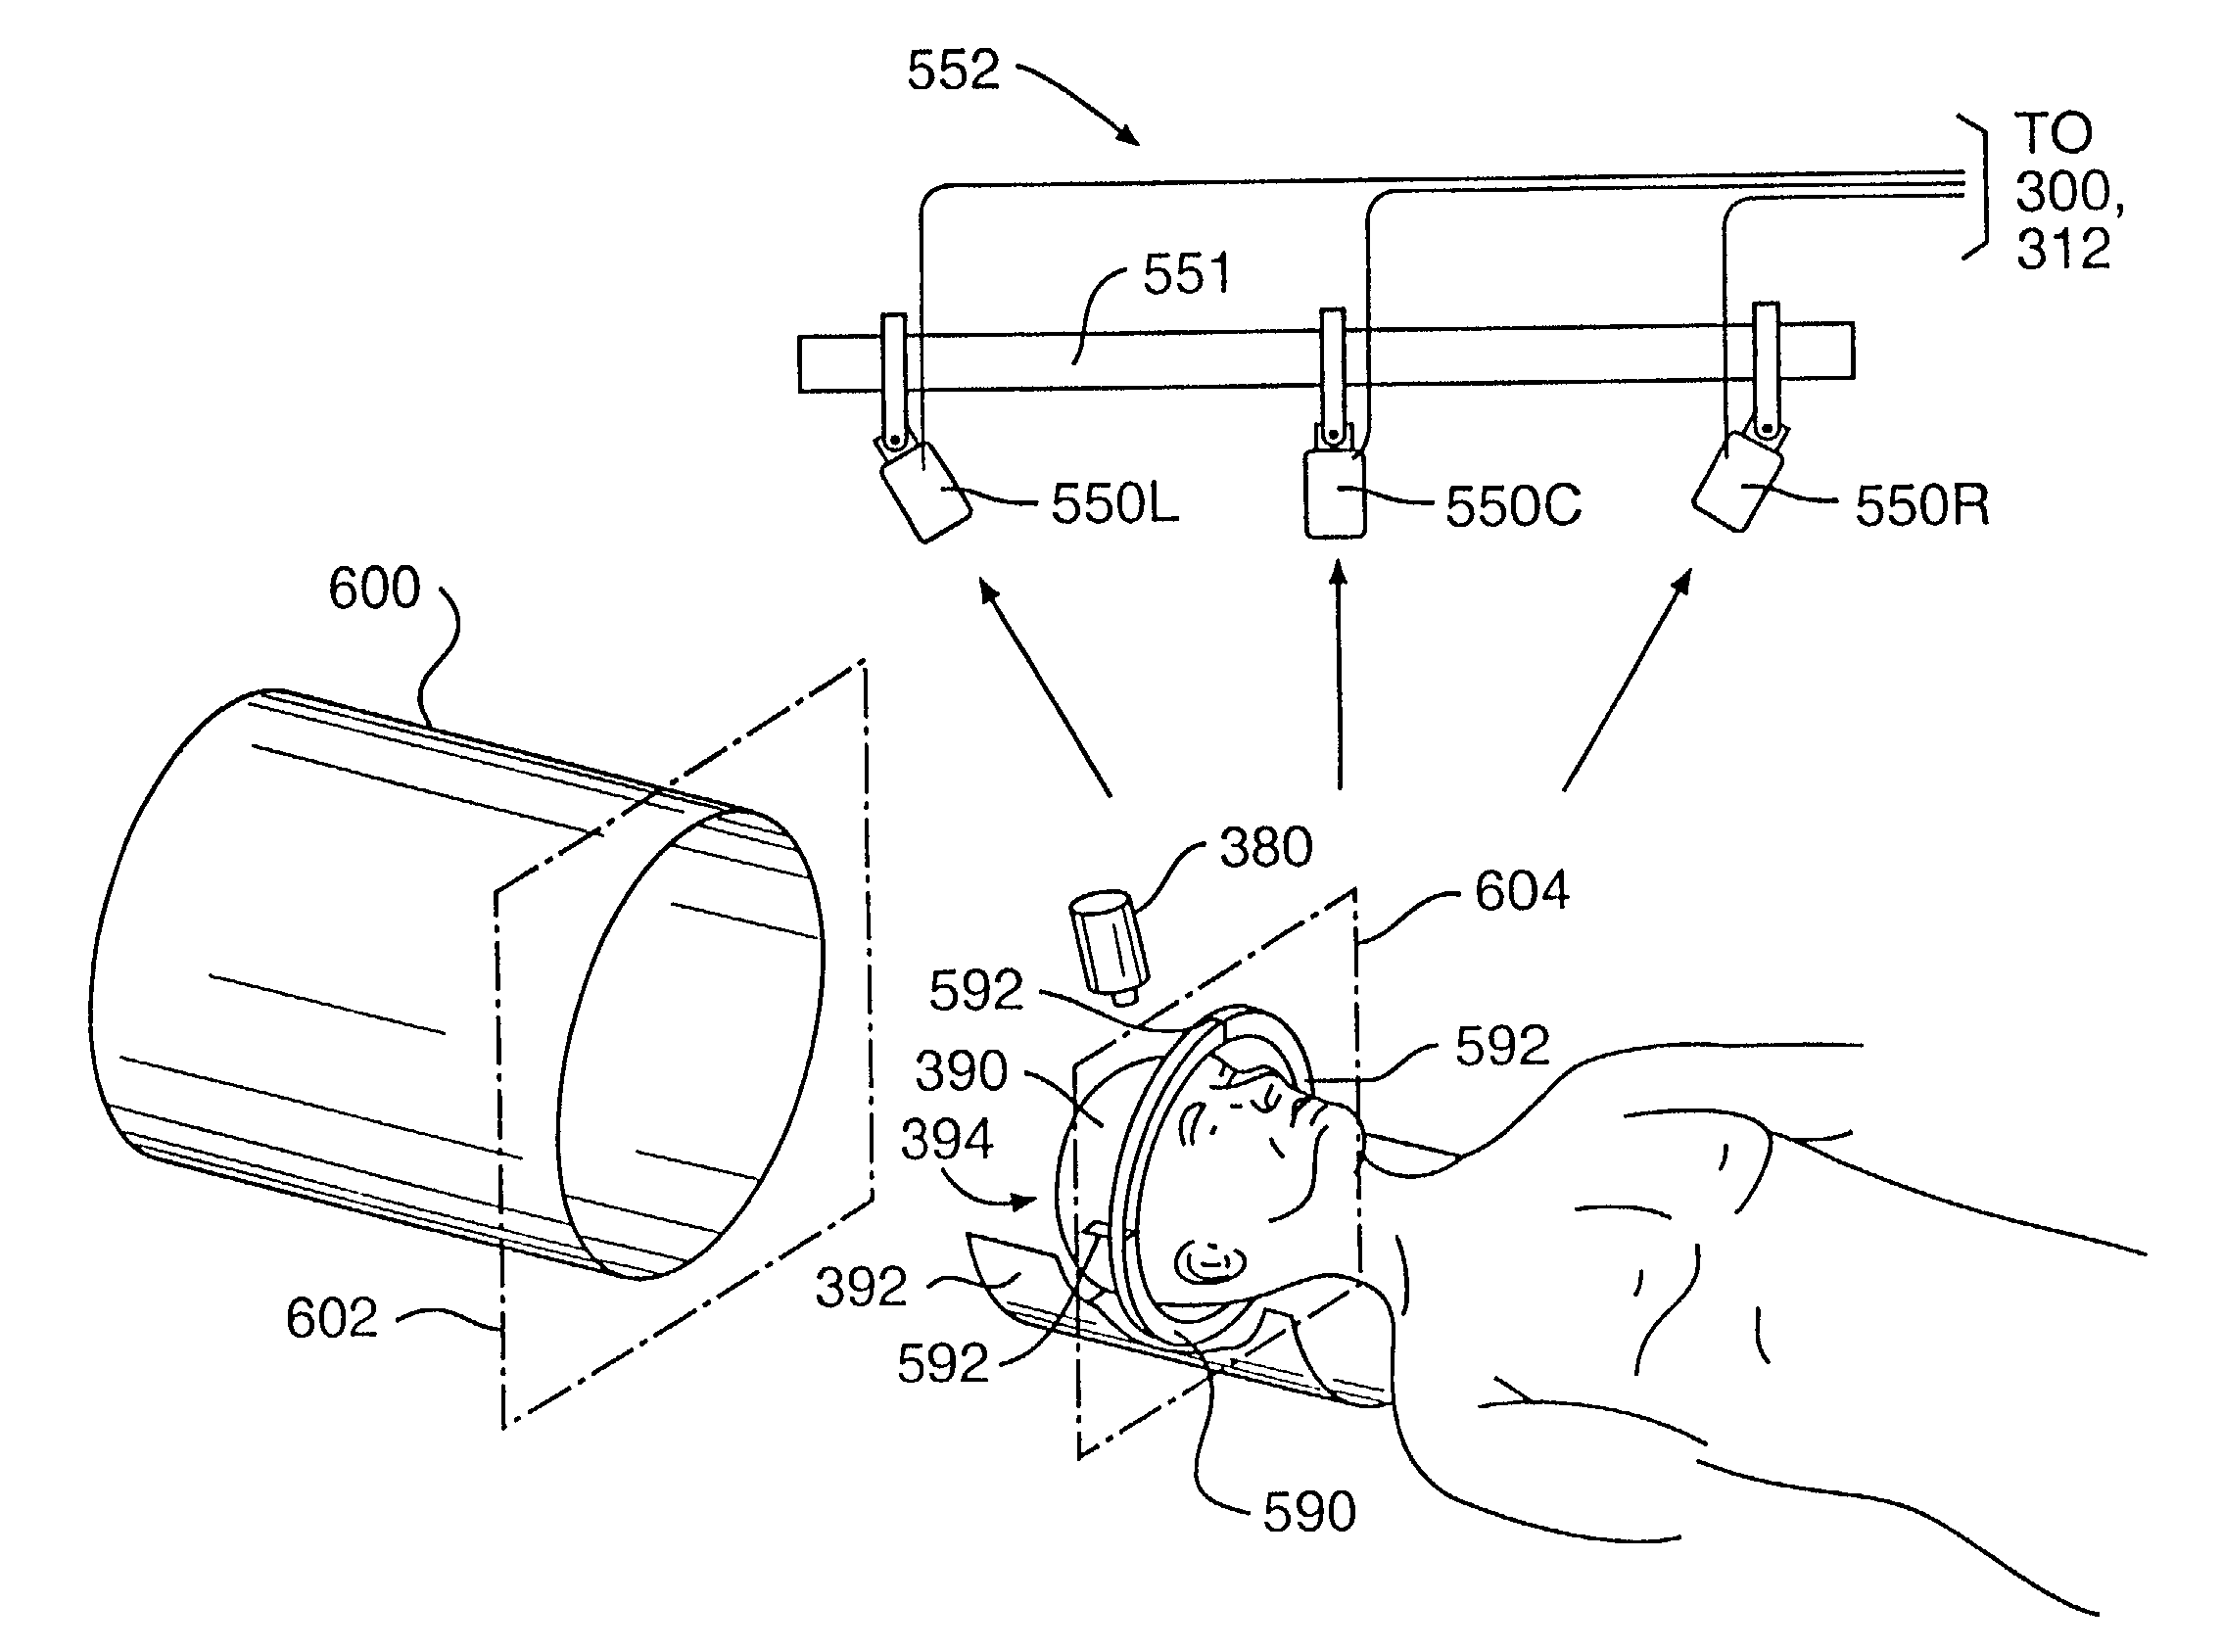 System for indicating the position of a surgical probe within a head on an image of the head